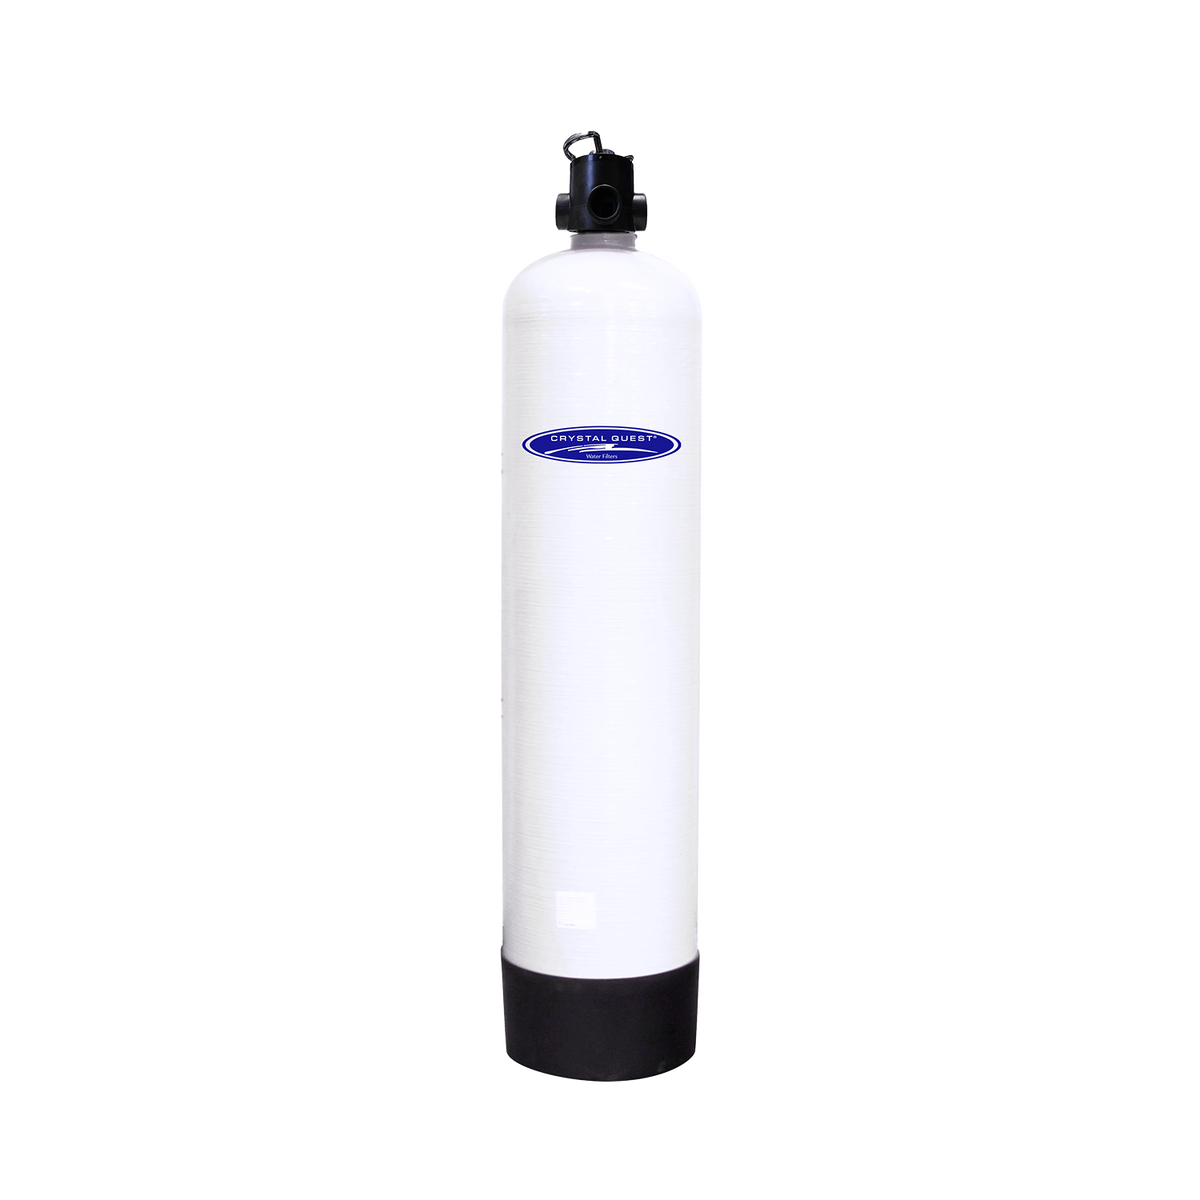 20 GPM / Manual (Downflow w/ Backwash) Granular Activated Carbon Water Filtration System - Commercial - Crystal Quest